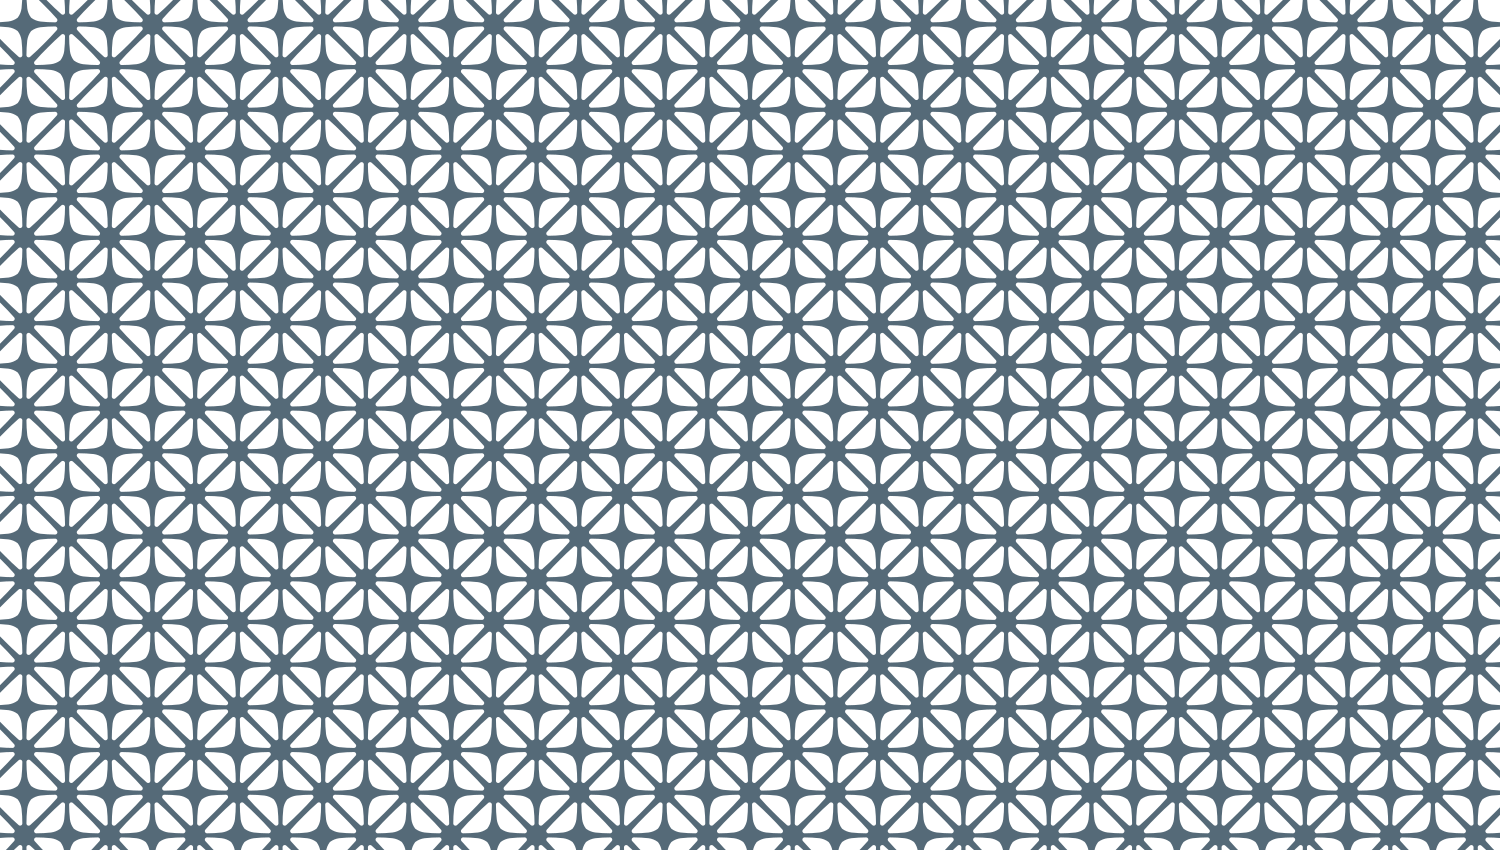 Parasoleil™ Dawn Grille© pattern displayed with a blue color overlay